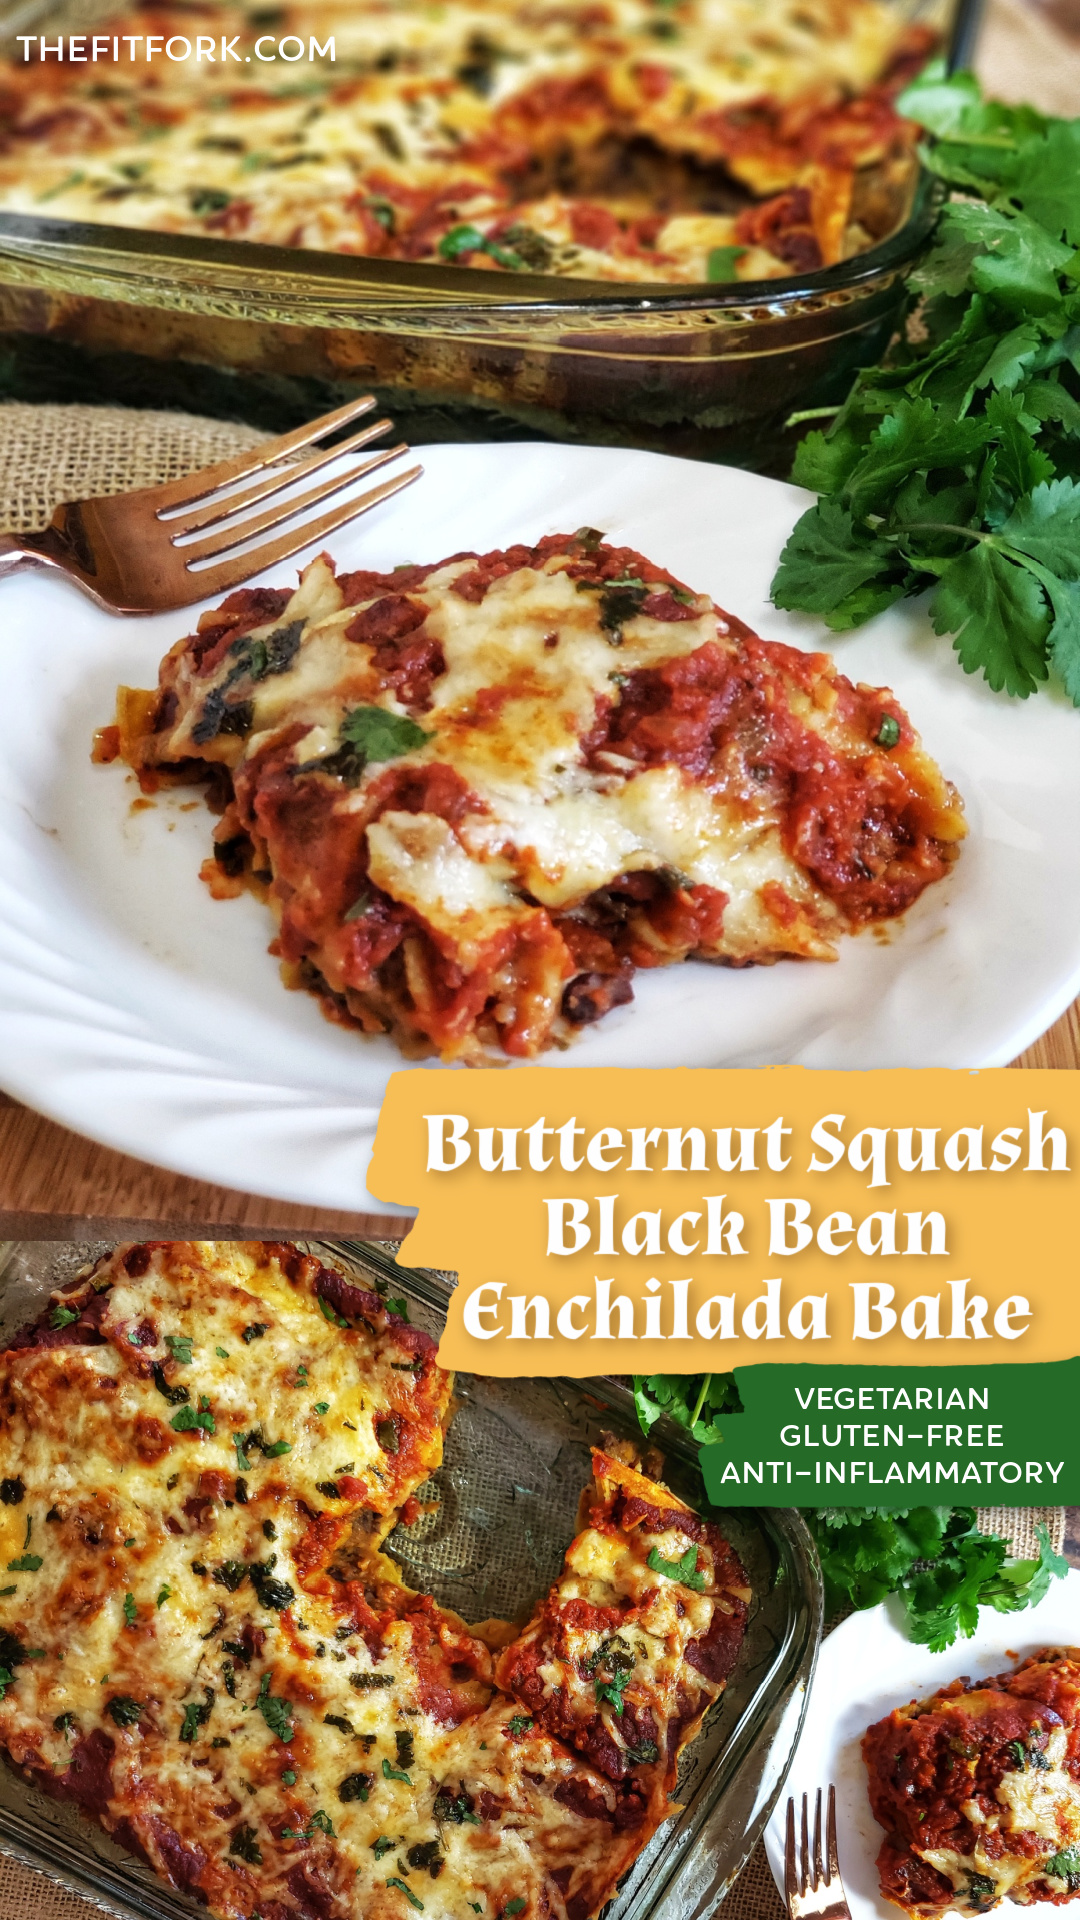 Butternut Squash Black Bean Enchilada Bake is a nourishing, family-friendly casserole suitable for gluten-free, vegetarian and anti-inflammation diets. Hints of southwestern spices, but not "hot," so the kids will love it -- tons of fiber and vitamins plus easy to make ahead and freezer friendly. Cut into squares and freeze for quick and easy weeknight dinners.